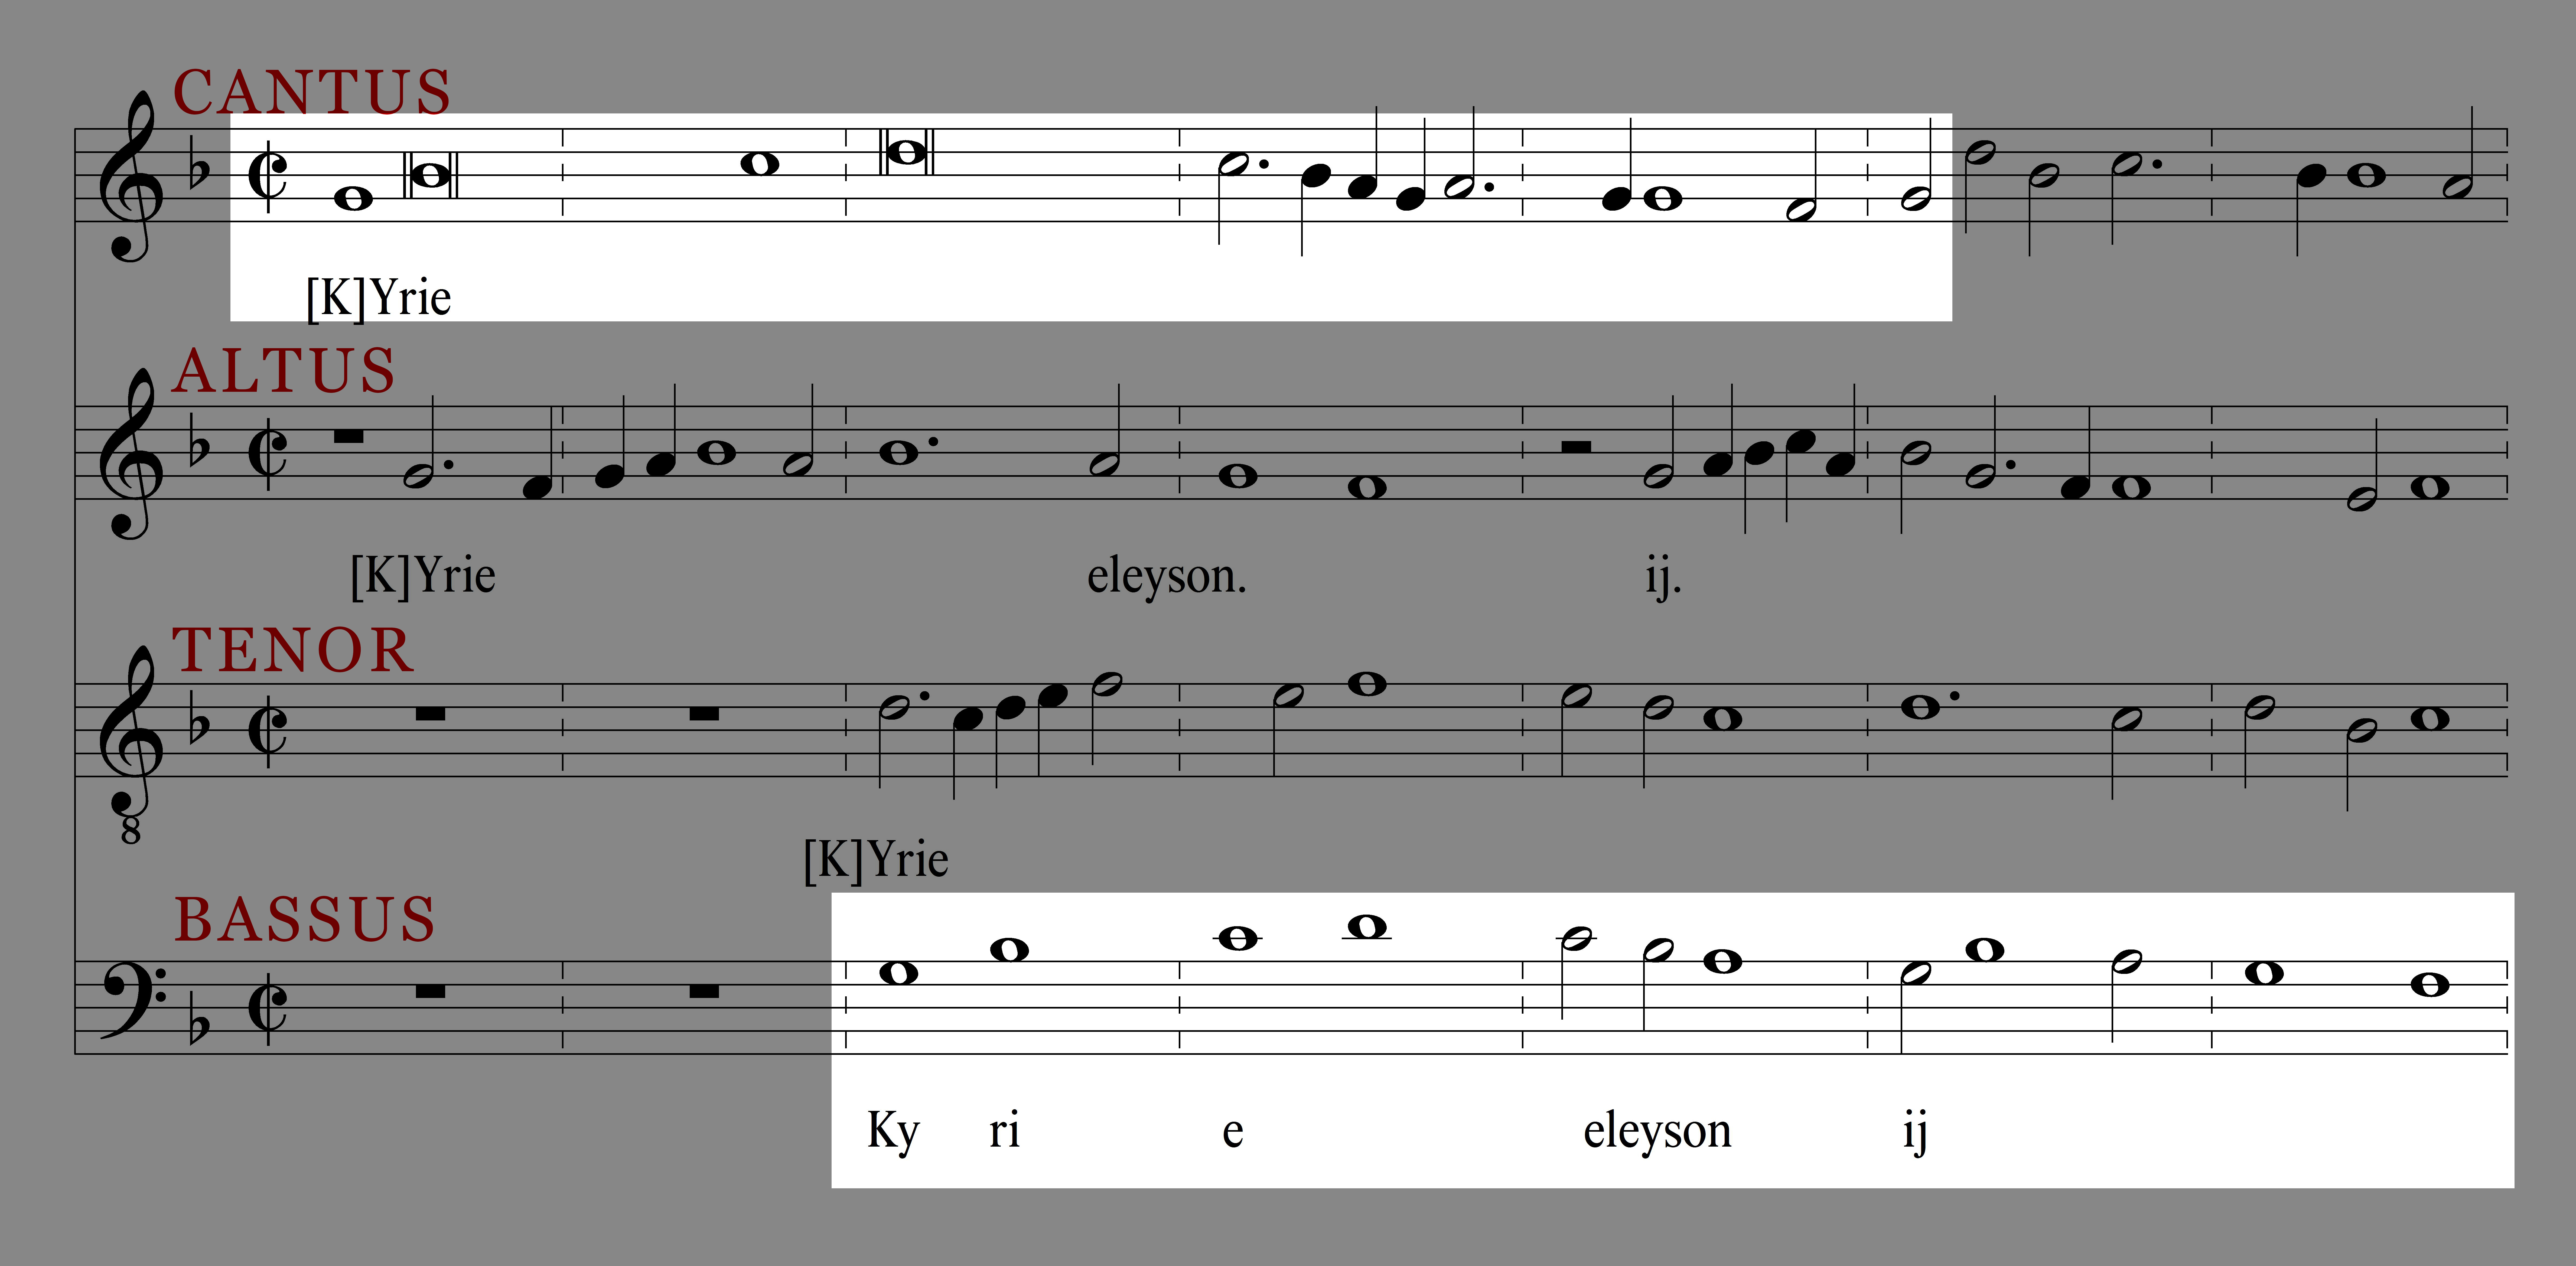 The plainsong melody highlighted in modern notation, with the voices labeled cantus, altus, tenor and bassus. The melody is highlighted in the cantus and bassus voices.